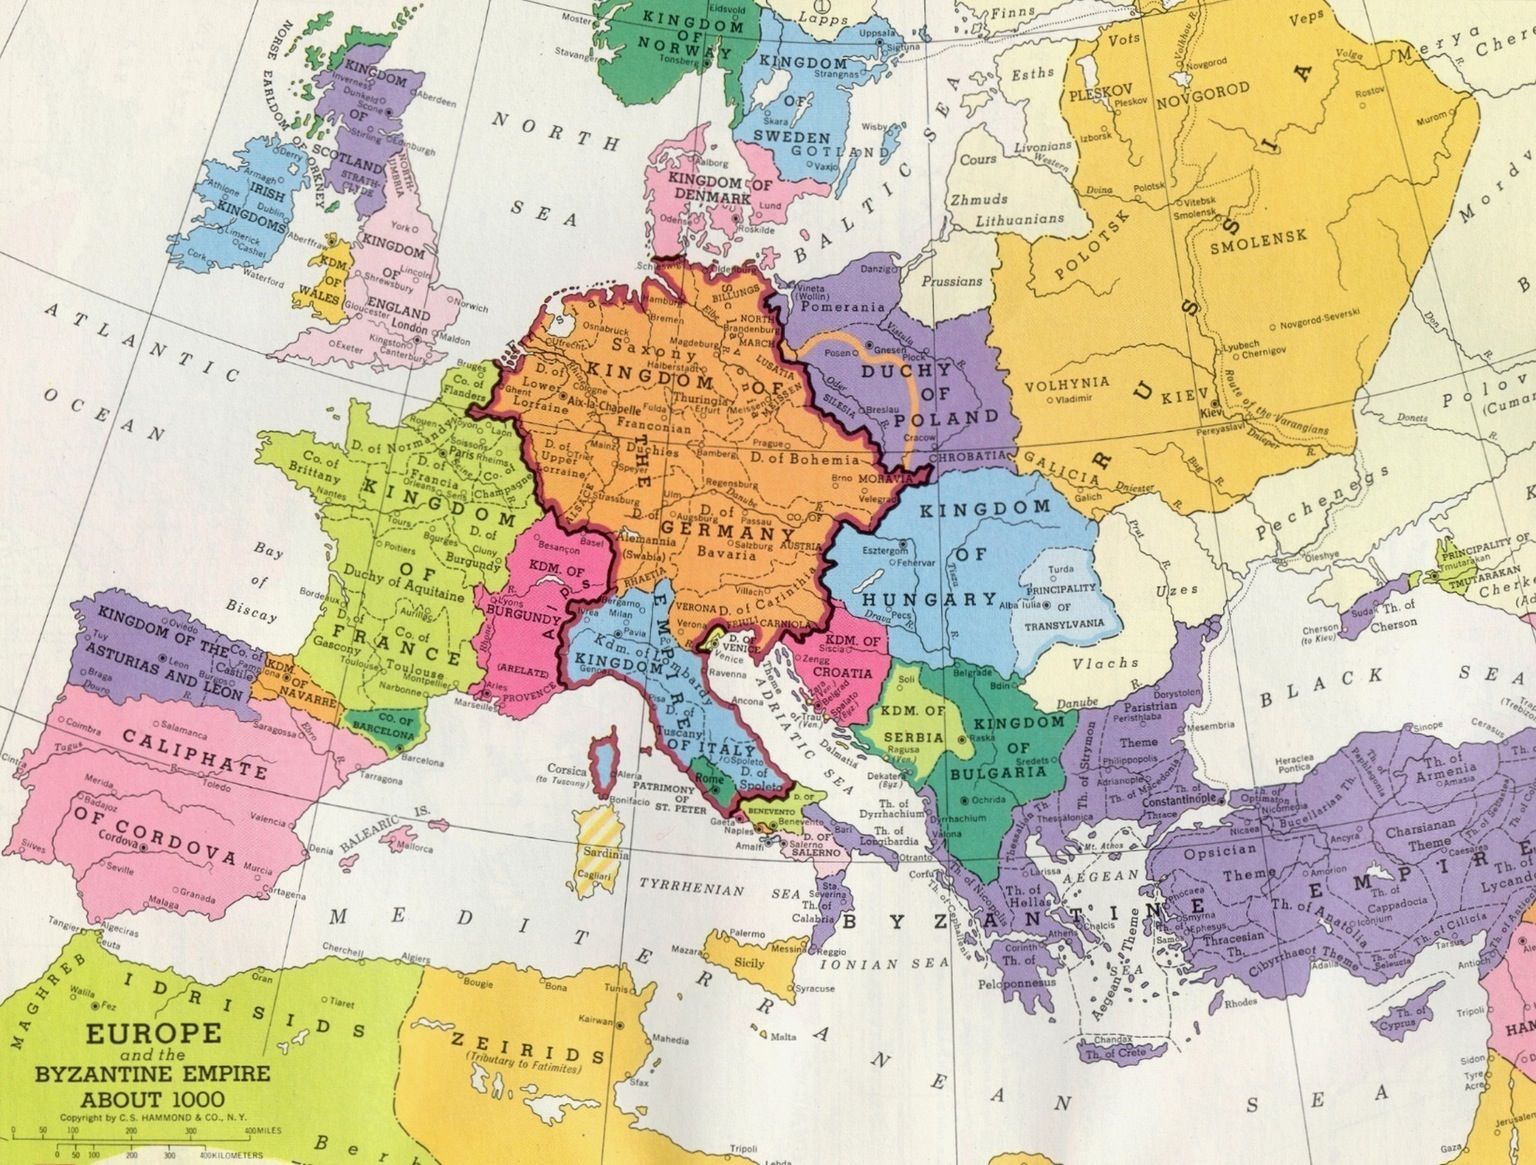 Map Of Europe Around The Year 1000 | Carte Géographique Du intérieur Carte Géographique Europe